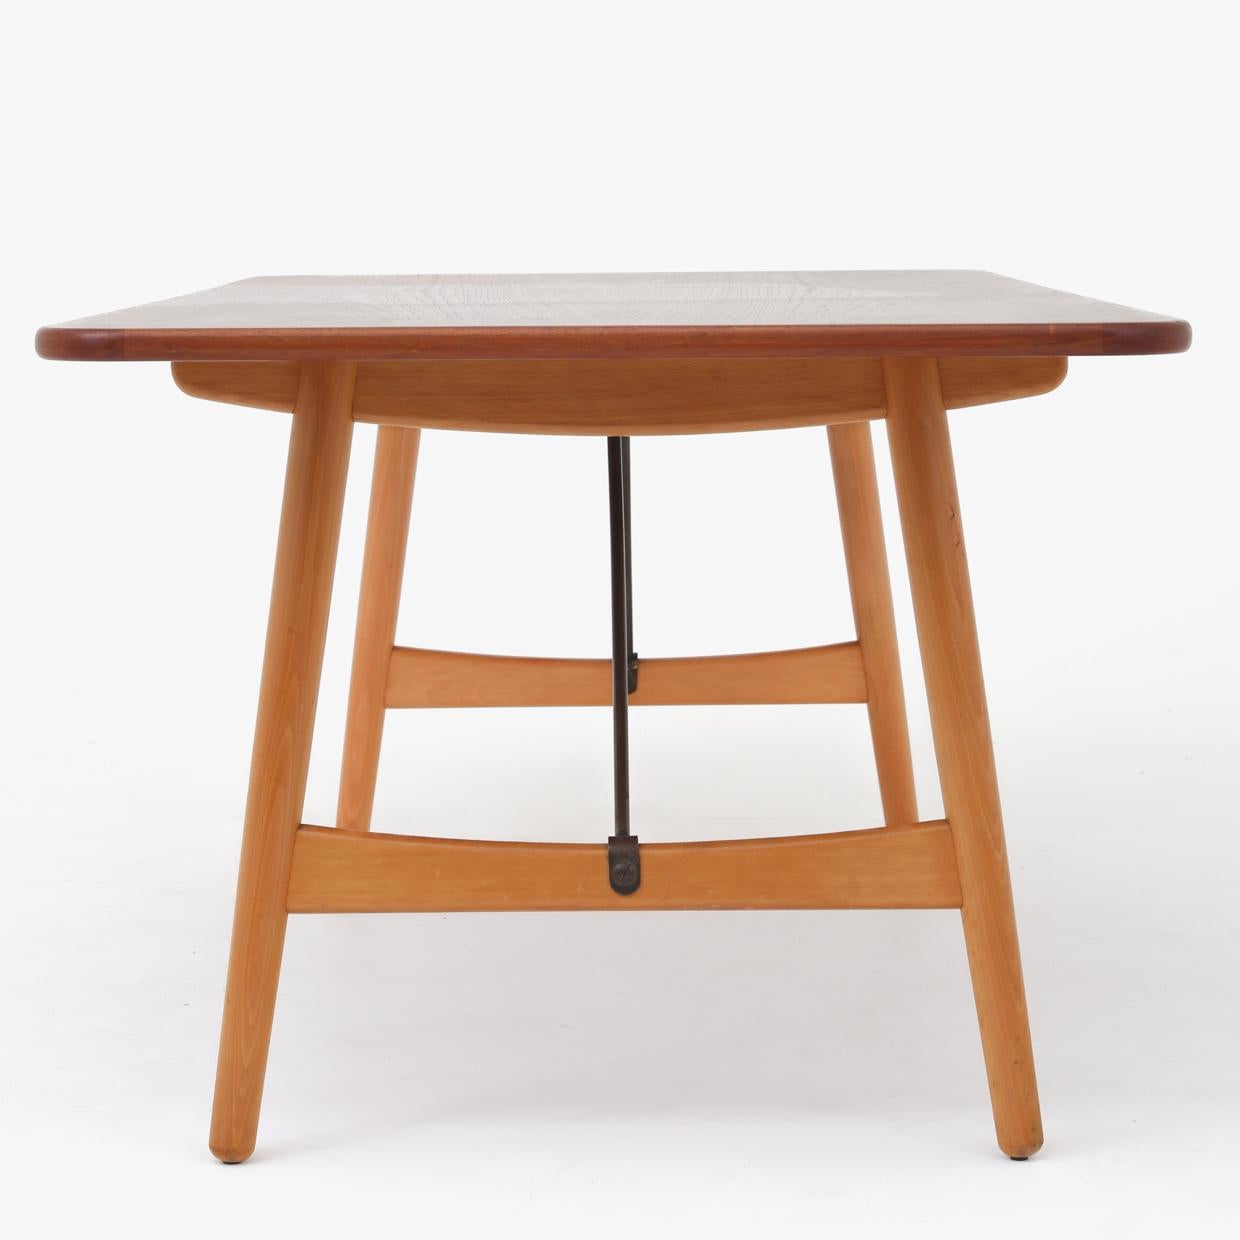 'Hunting Table' dining table with patinated beech frame, teak top with rounded corners and brass supports. Designed in 1950. Maker Søborg Møbler